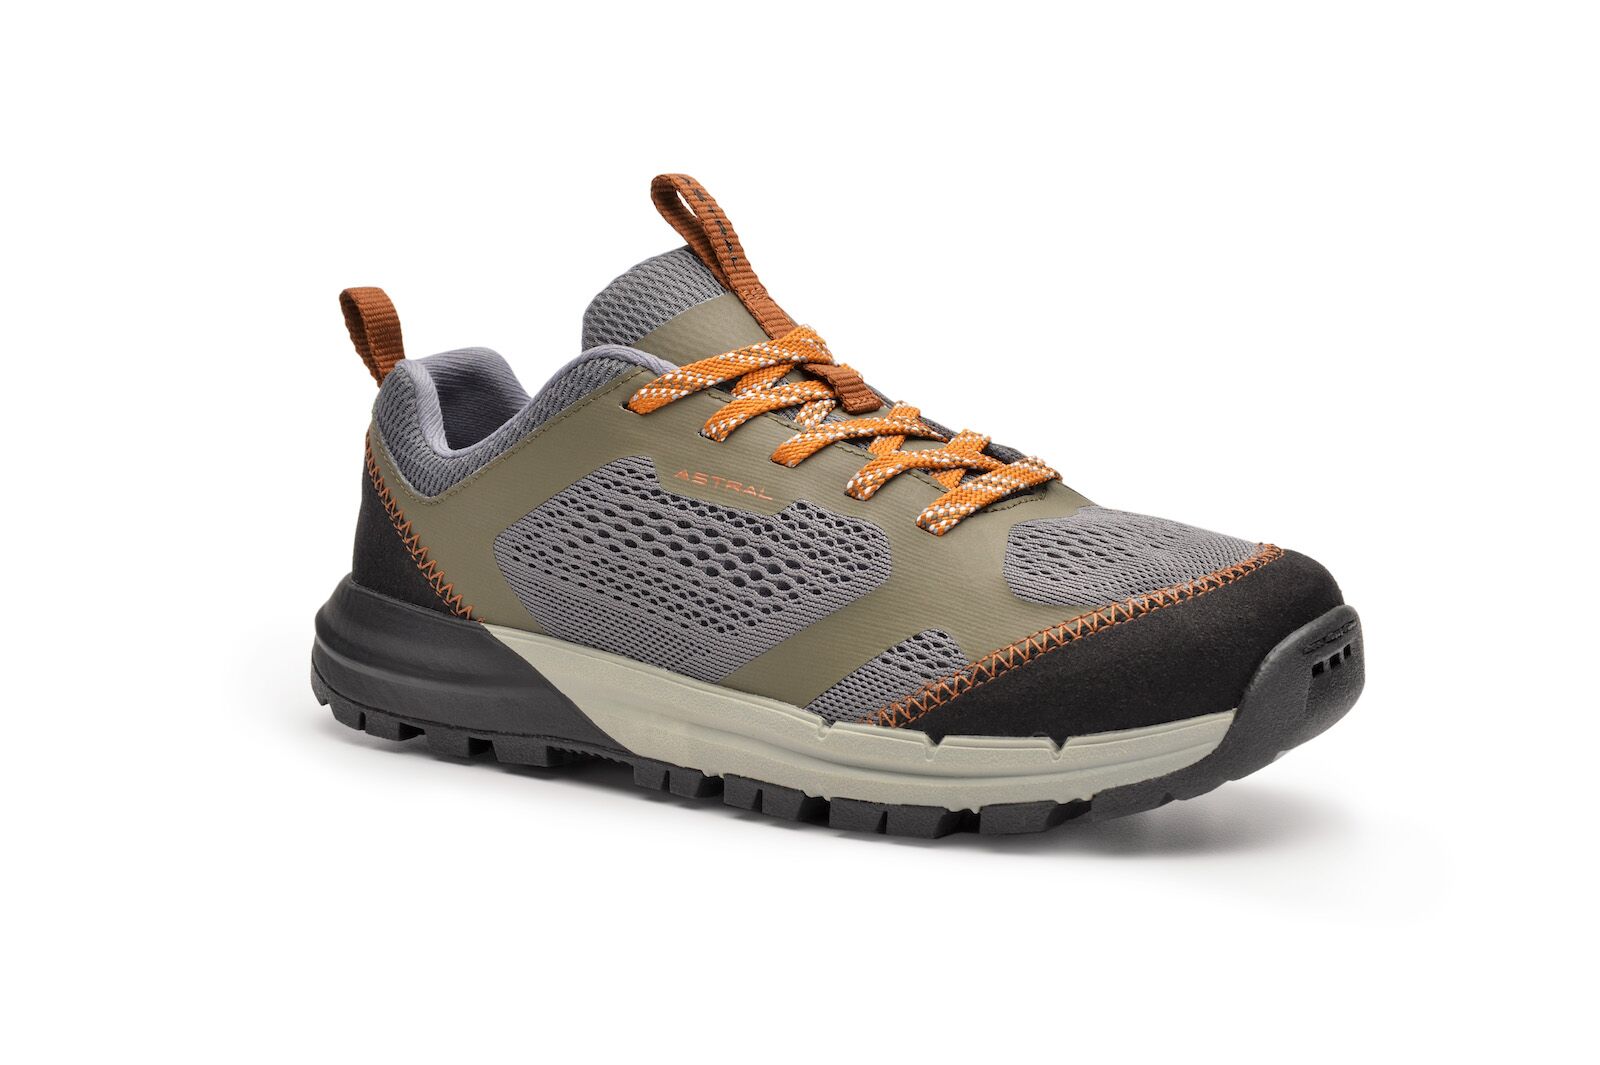 These Are the Best Women's Trail Shoes for Ultralight Outdoor Fun This Year